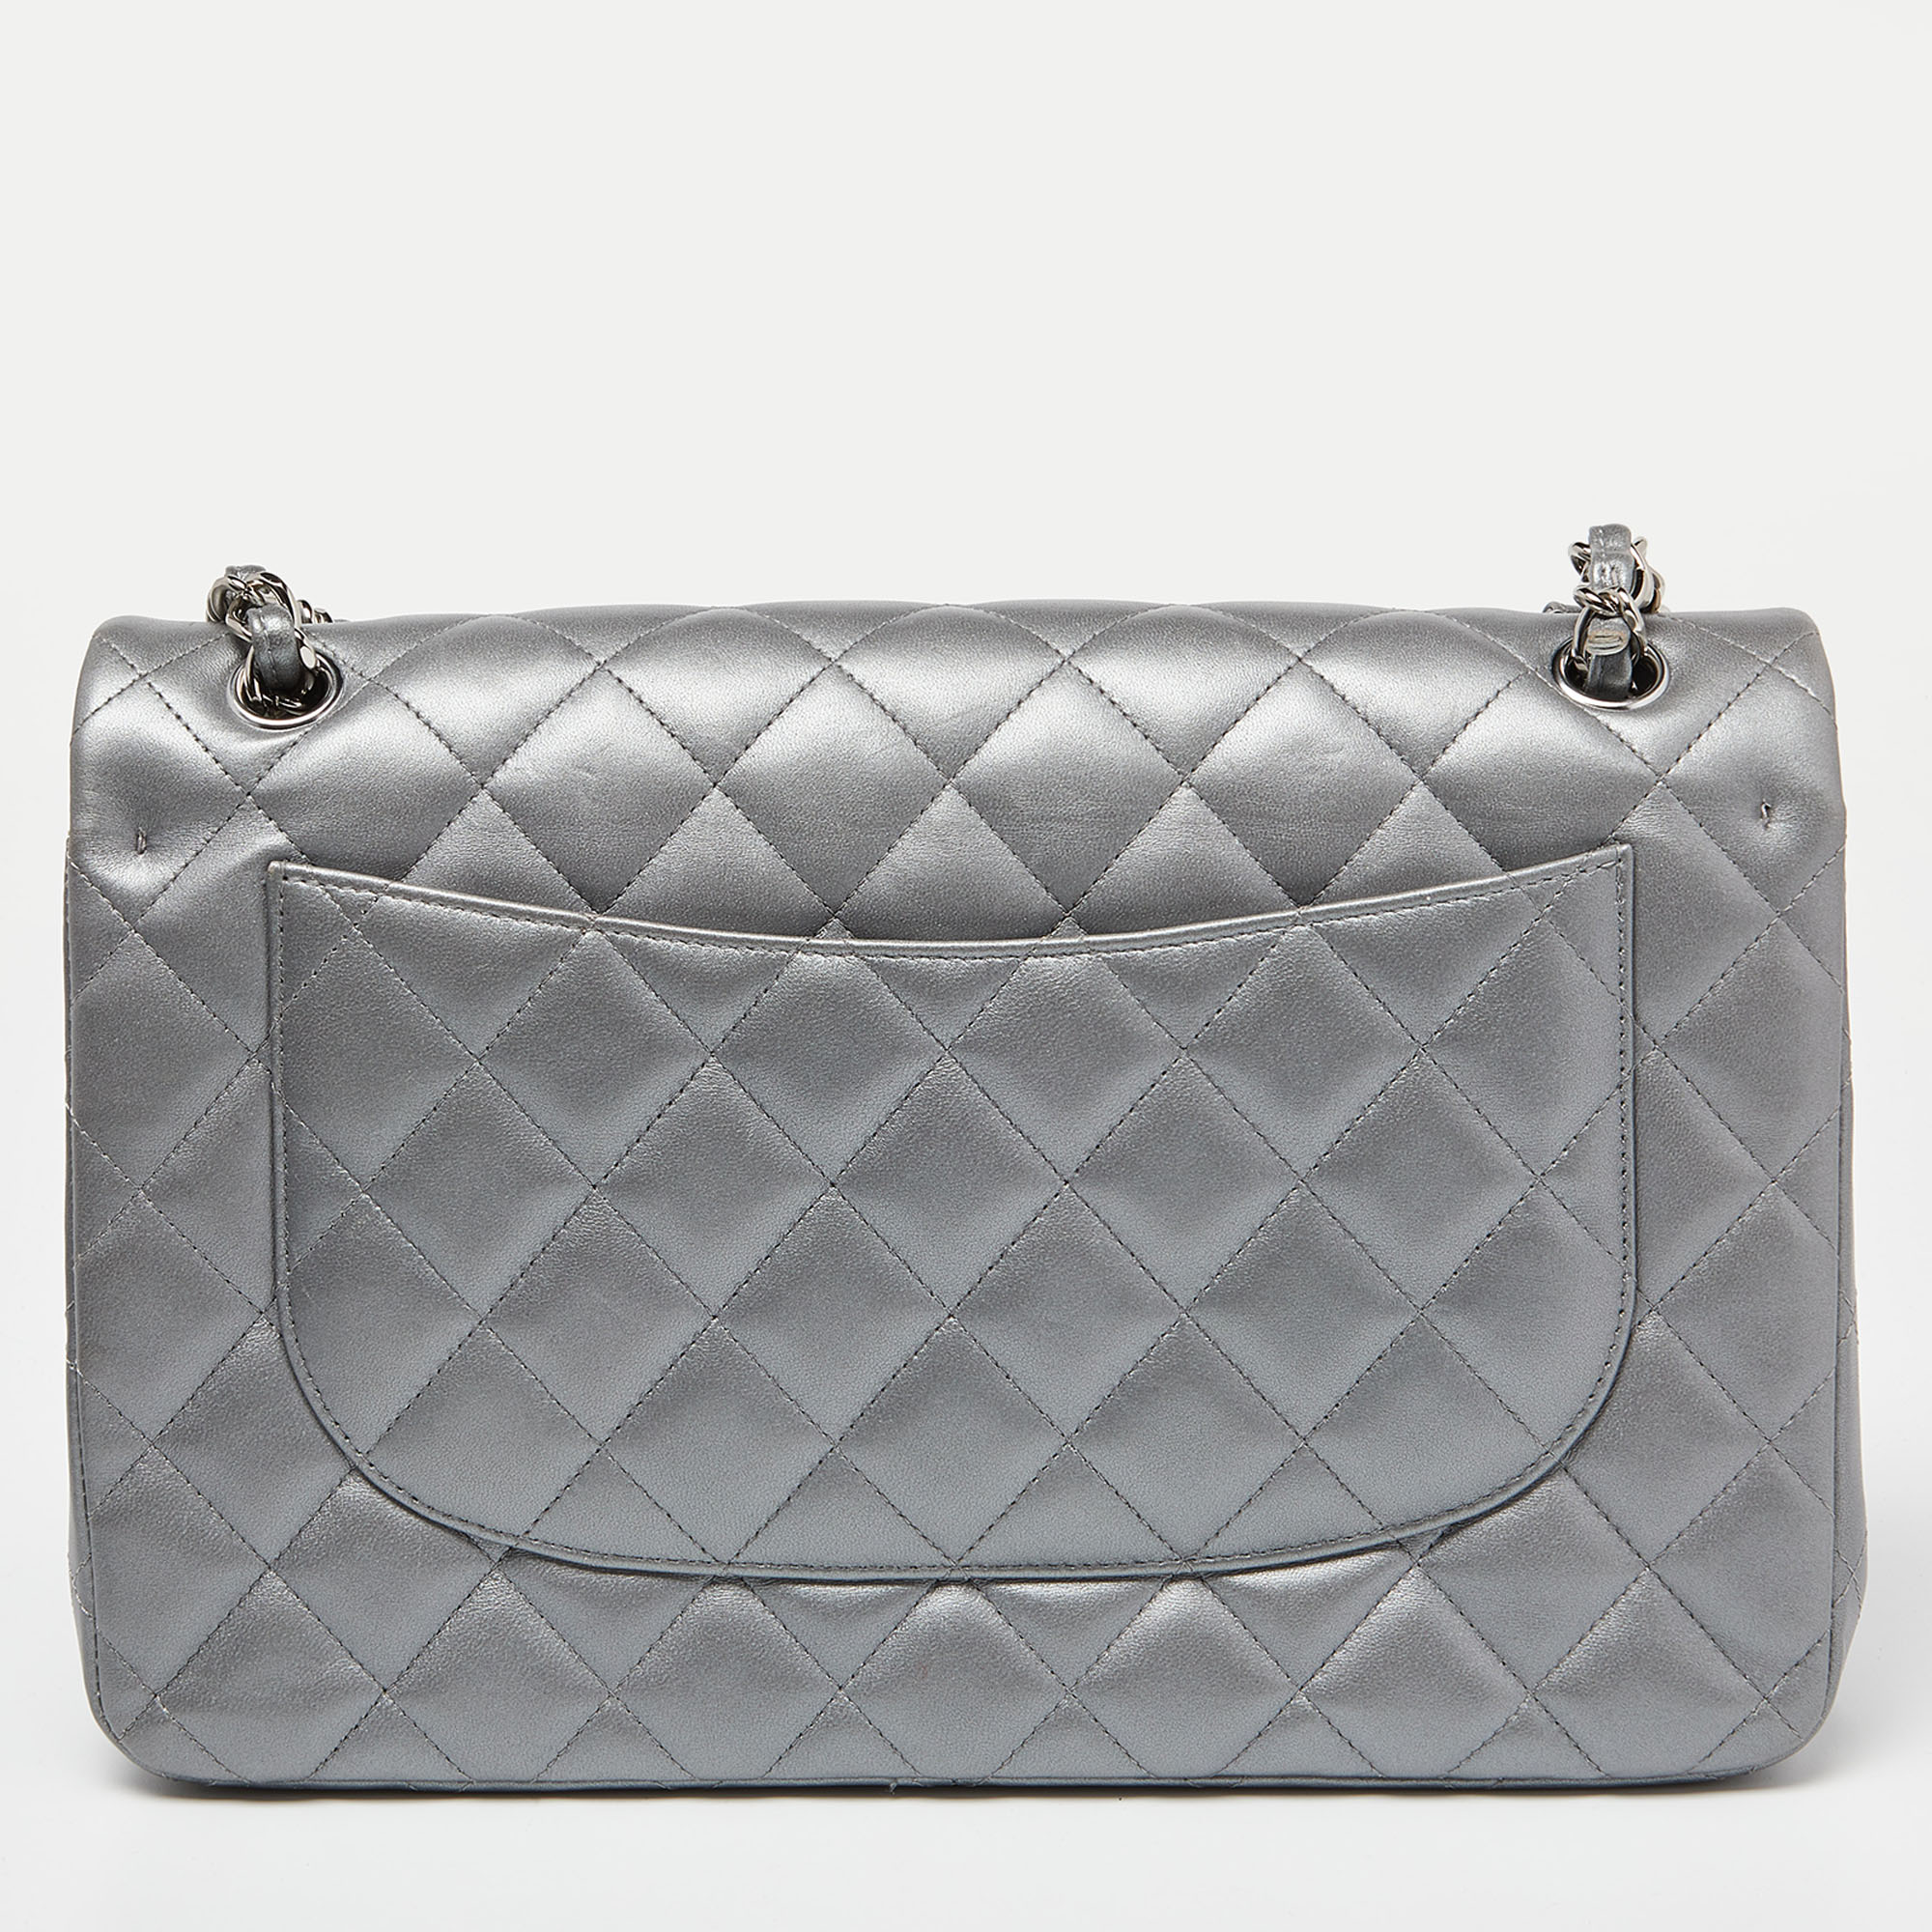 Chanel Silver Quilted Leather Jumbo Classic Double Flap Bag